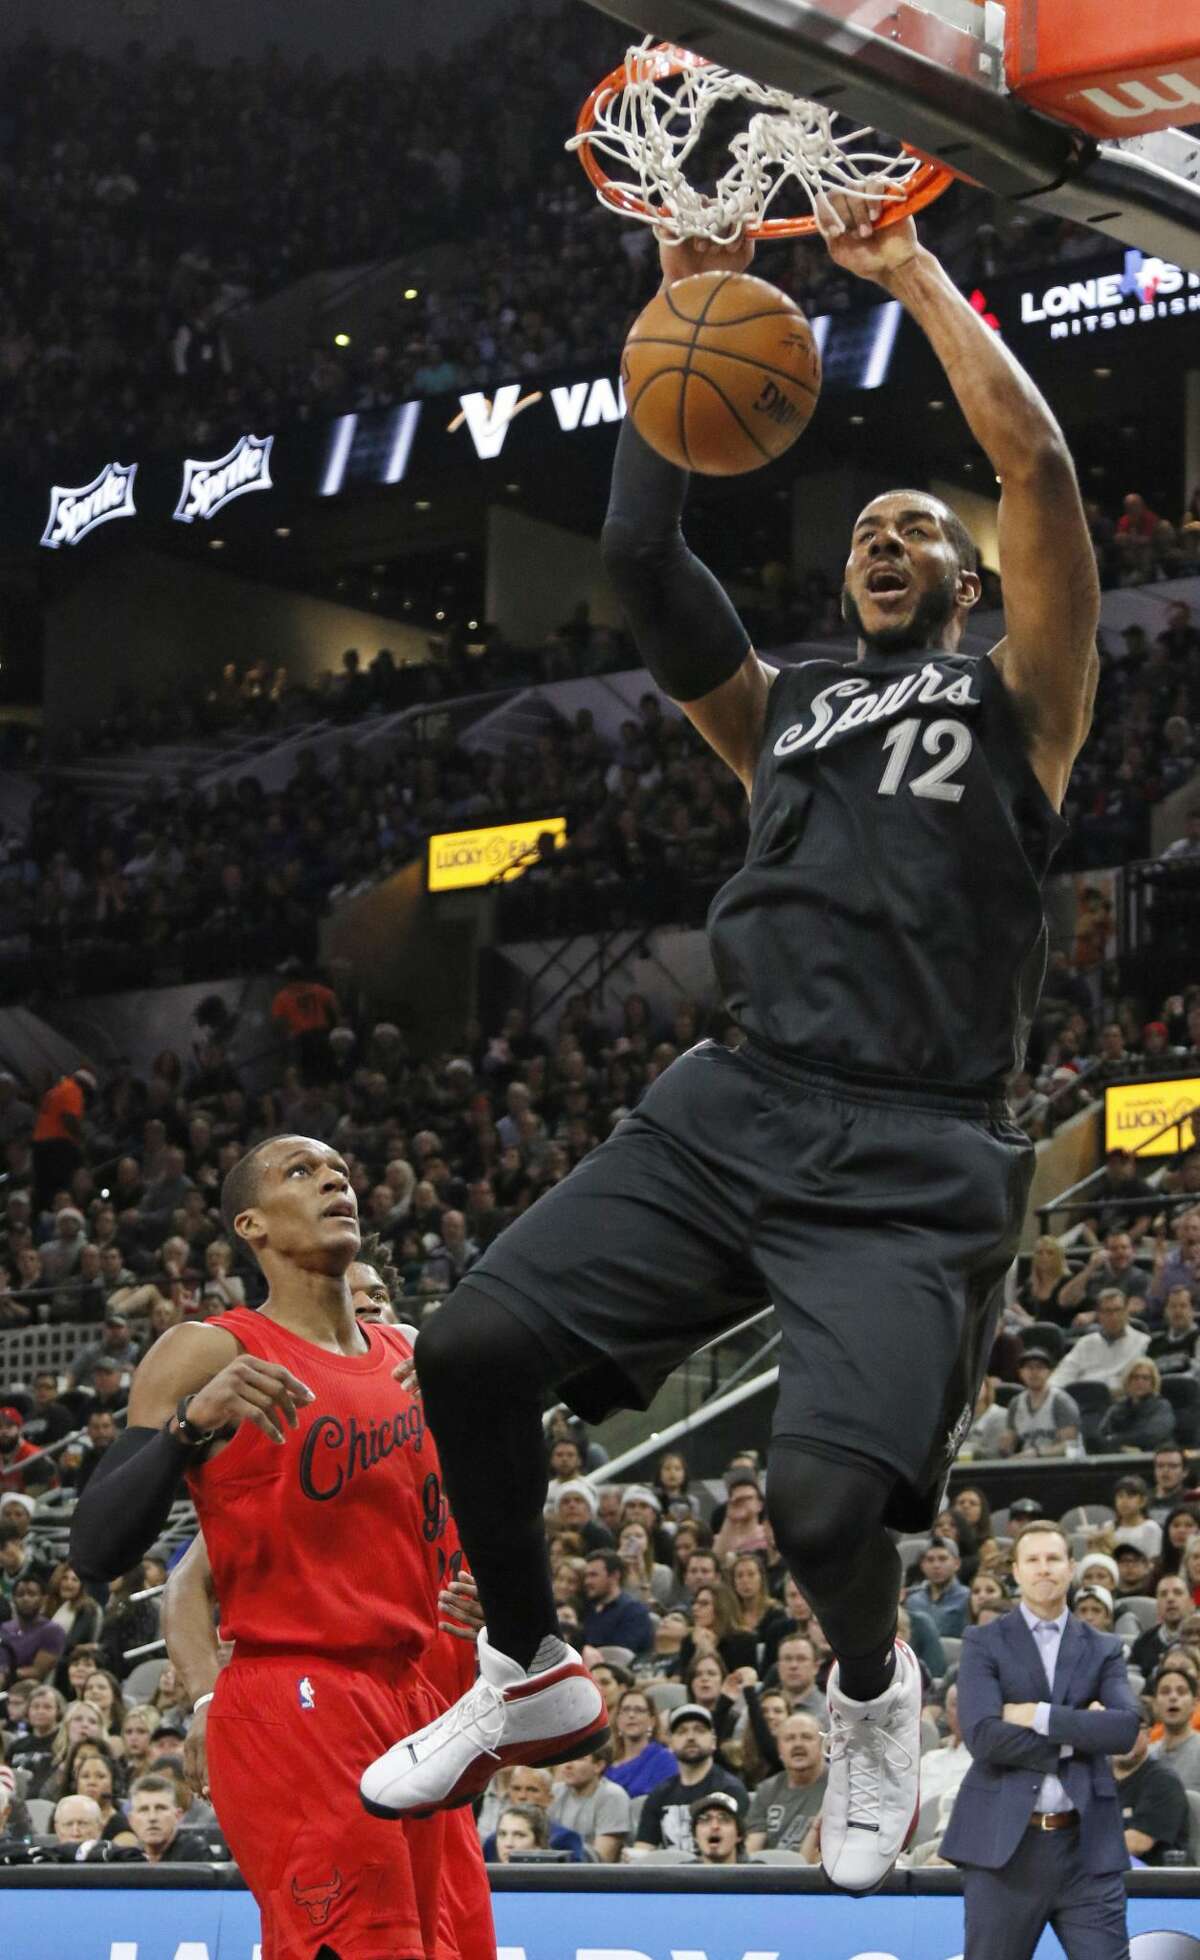 SAN ANTONIO,TX - DECEMBER 25: LaMarcus Aldridge #12 of the San Antonio Spurs dunks in front of Rajon Rondo #9 of the Chicago Bulls at AT&T Center on December 25, 2016 in San Antonio, Texas. NOTE TO USER: User expressly acknowledges and agrees that , by downloading and or using this photograph, User is consenting to the terms and conditions of the Getty Images License Agreement. (Photo by Ronald Cortes/Getty Images)